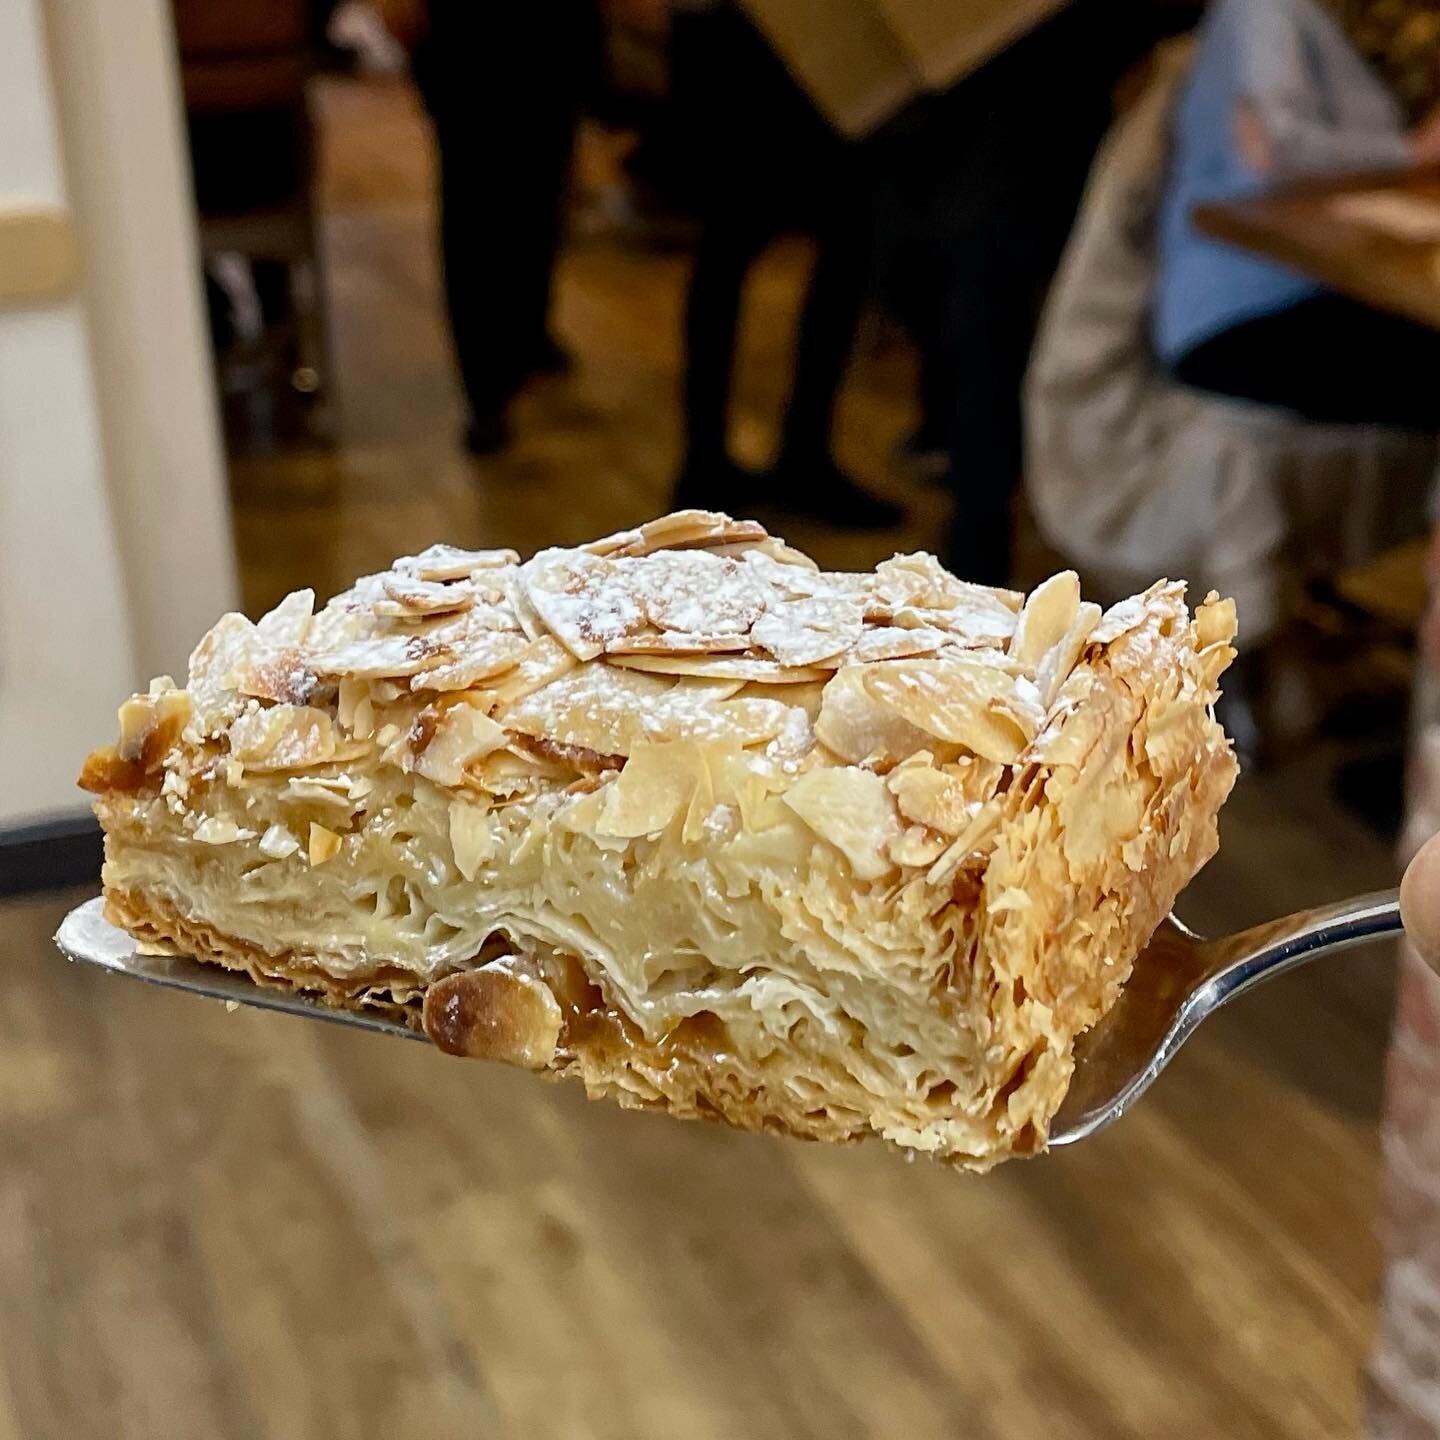 This almond slice is based on a pastry I had @intrepidbakers_nw5 recently which was one of the nicest things I&rsquo;d had out in ages.  They were kind and generous enough to show me how to make it, so now it makes an honourable appearance at The Owl